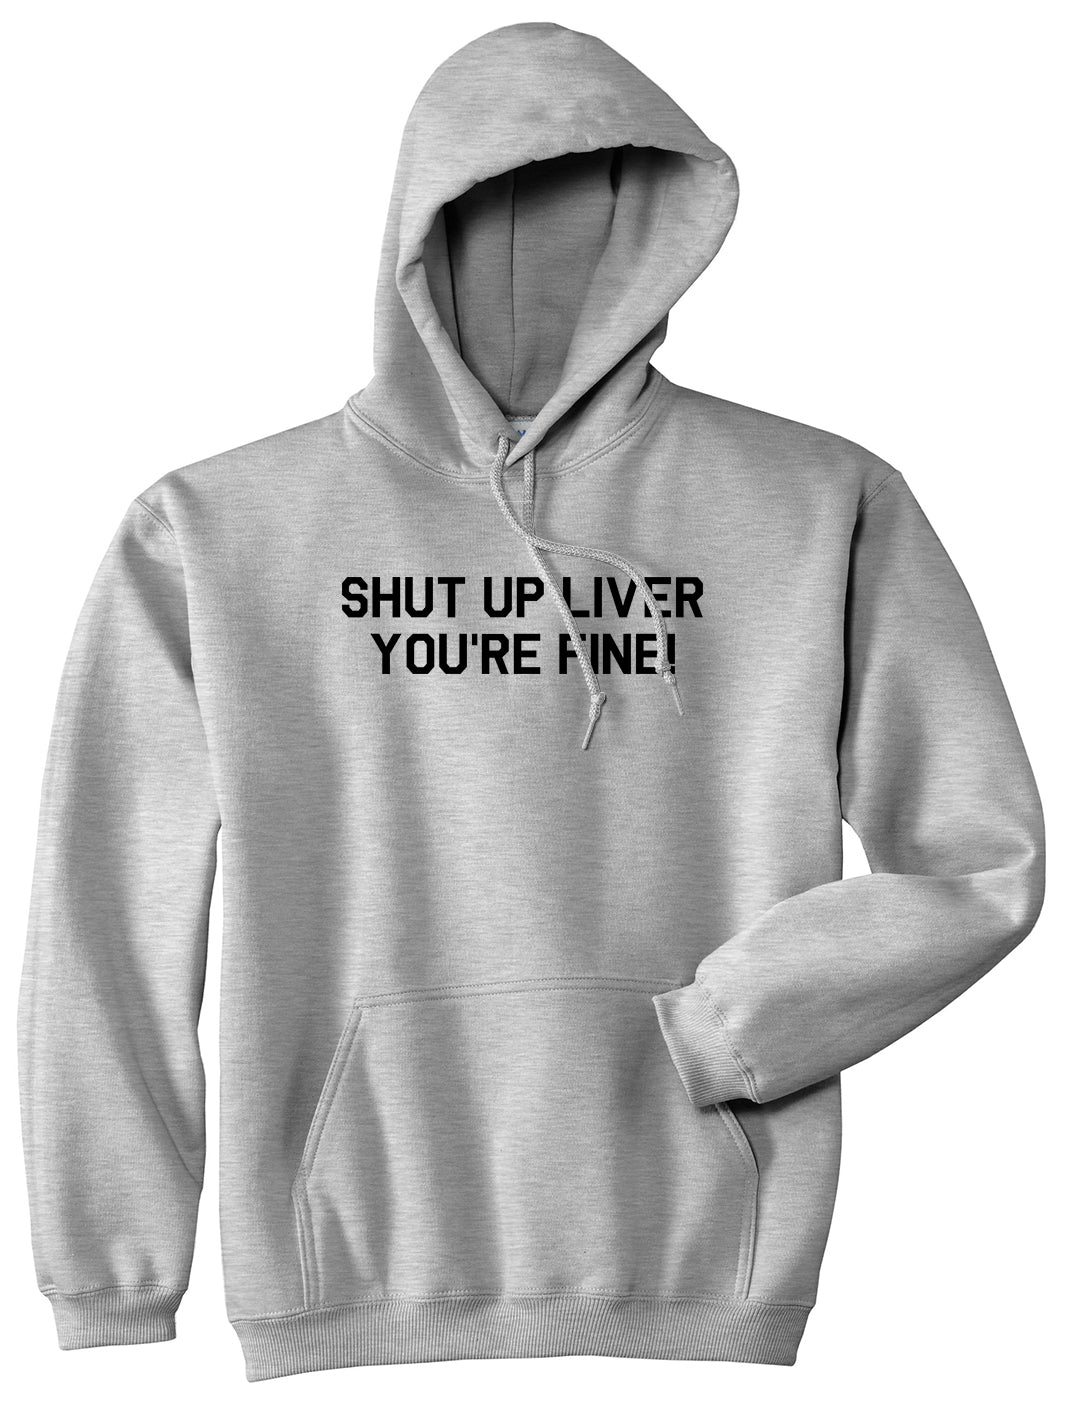 Shut Up Liver Youre Fine Mens Pullover Hoodie Grey